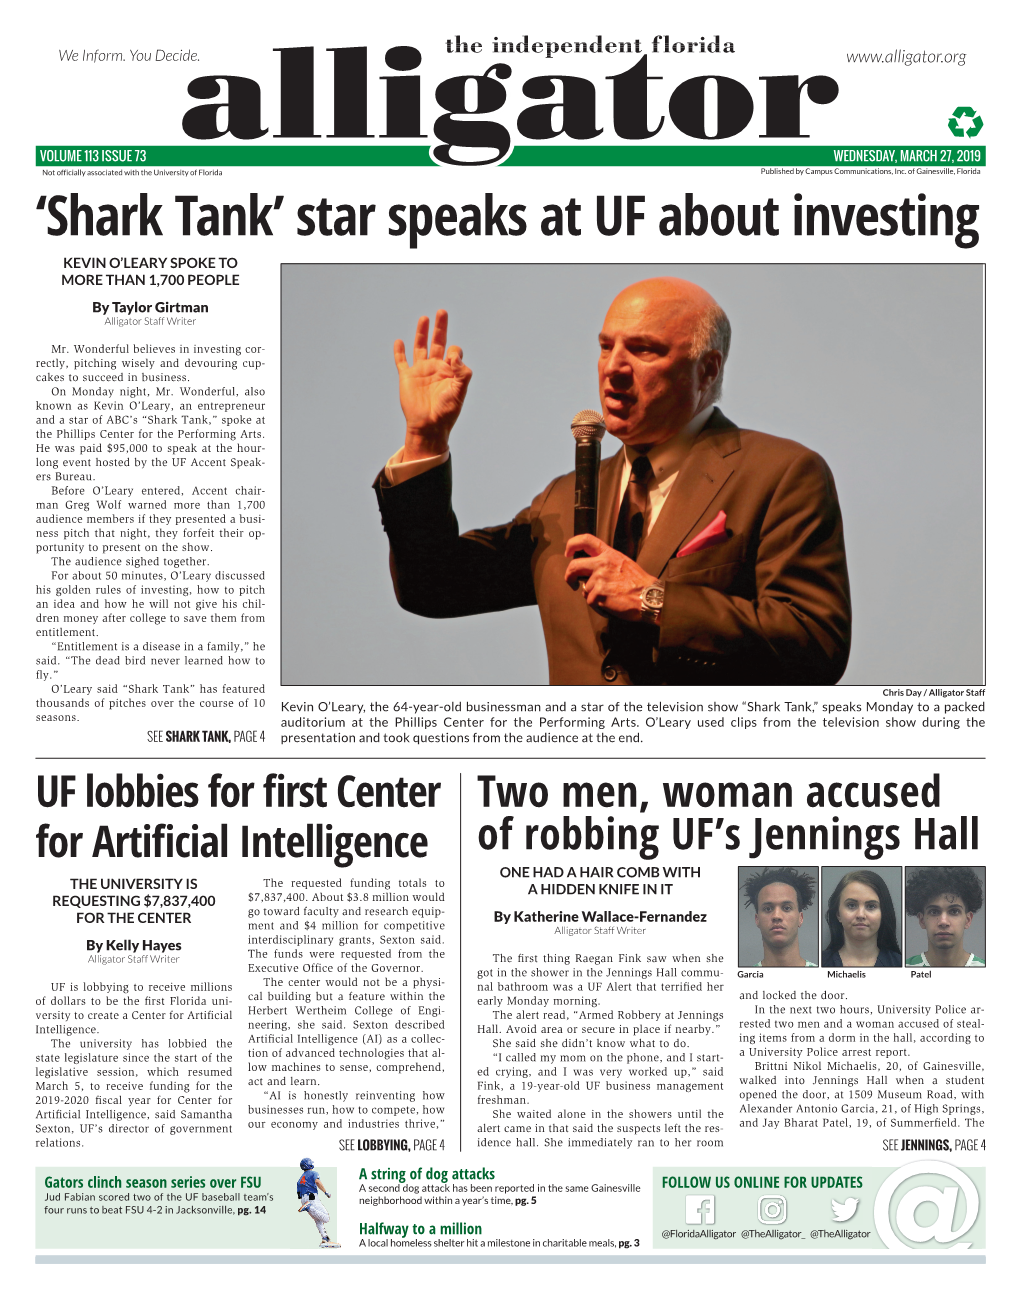 'Shark Tank' Star Speaks at UF About Investing